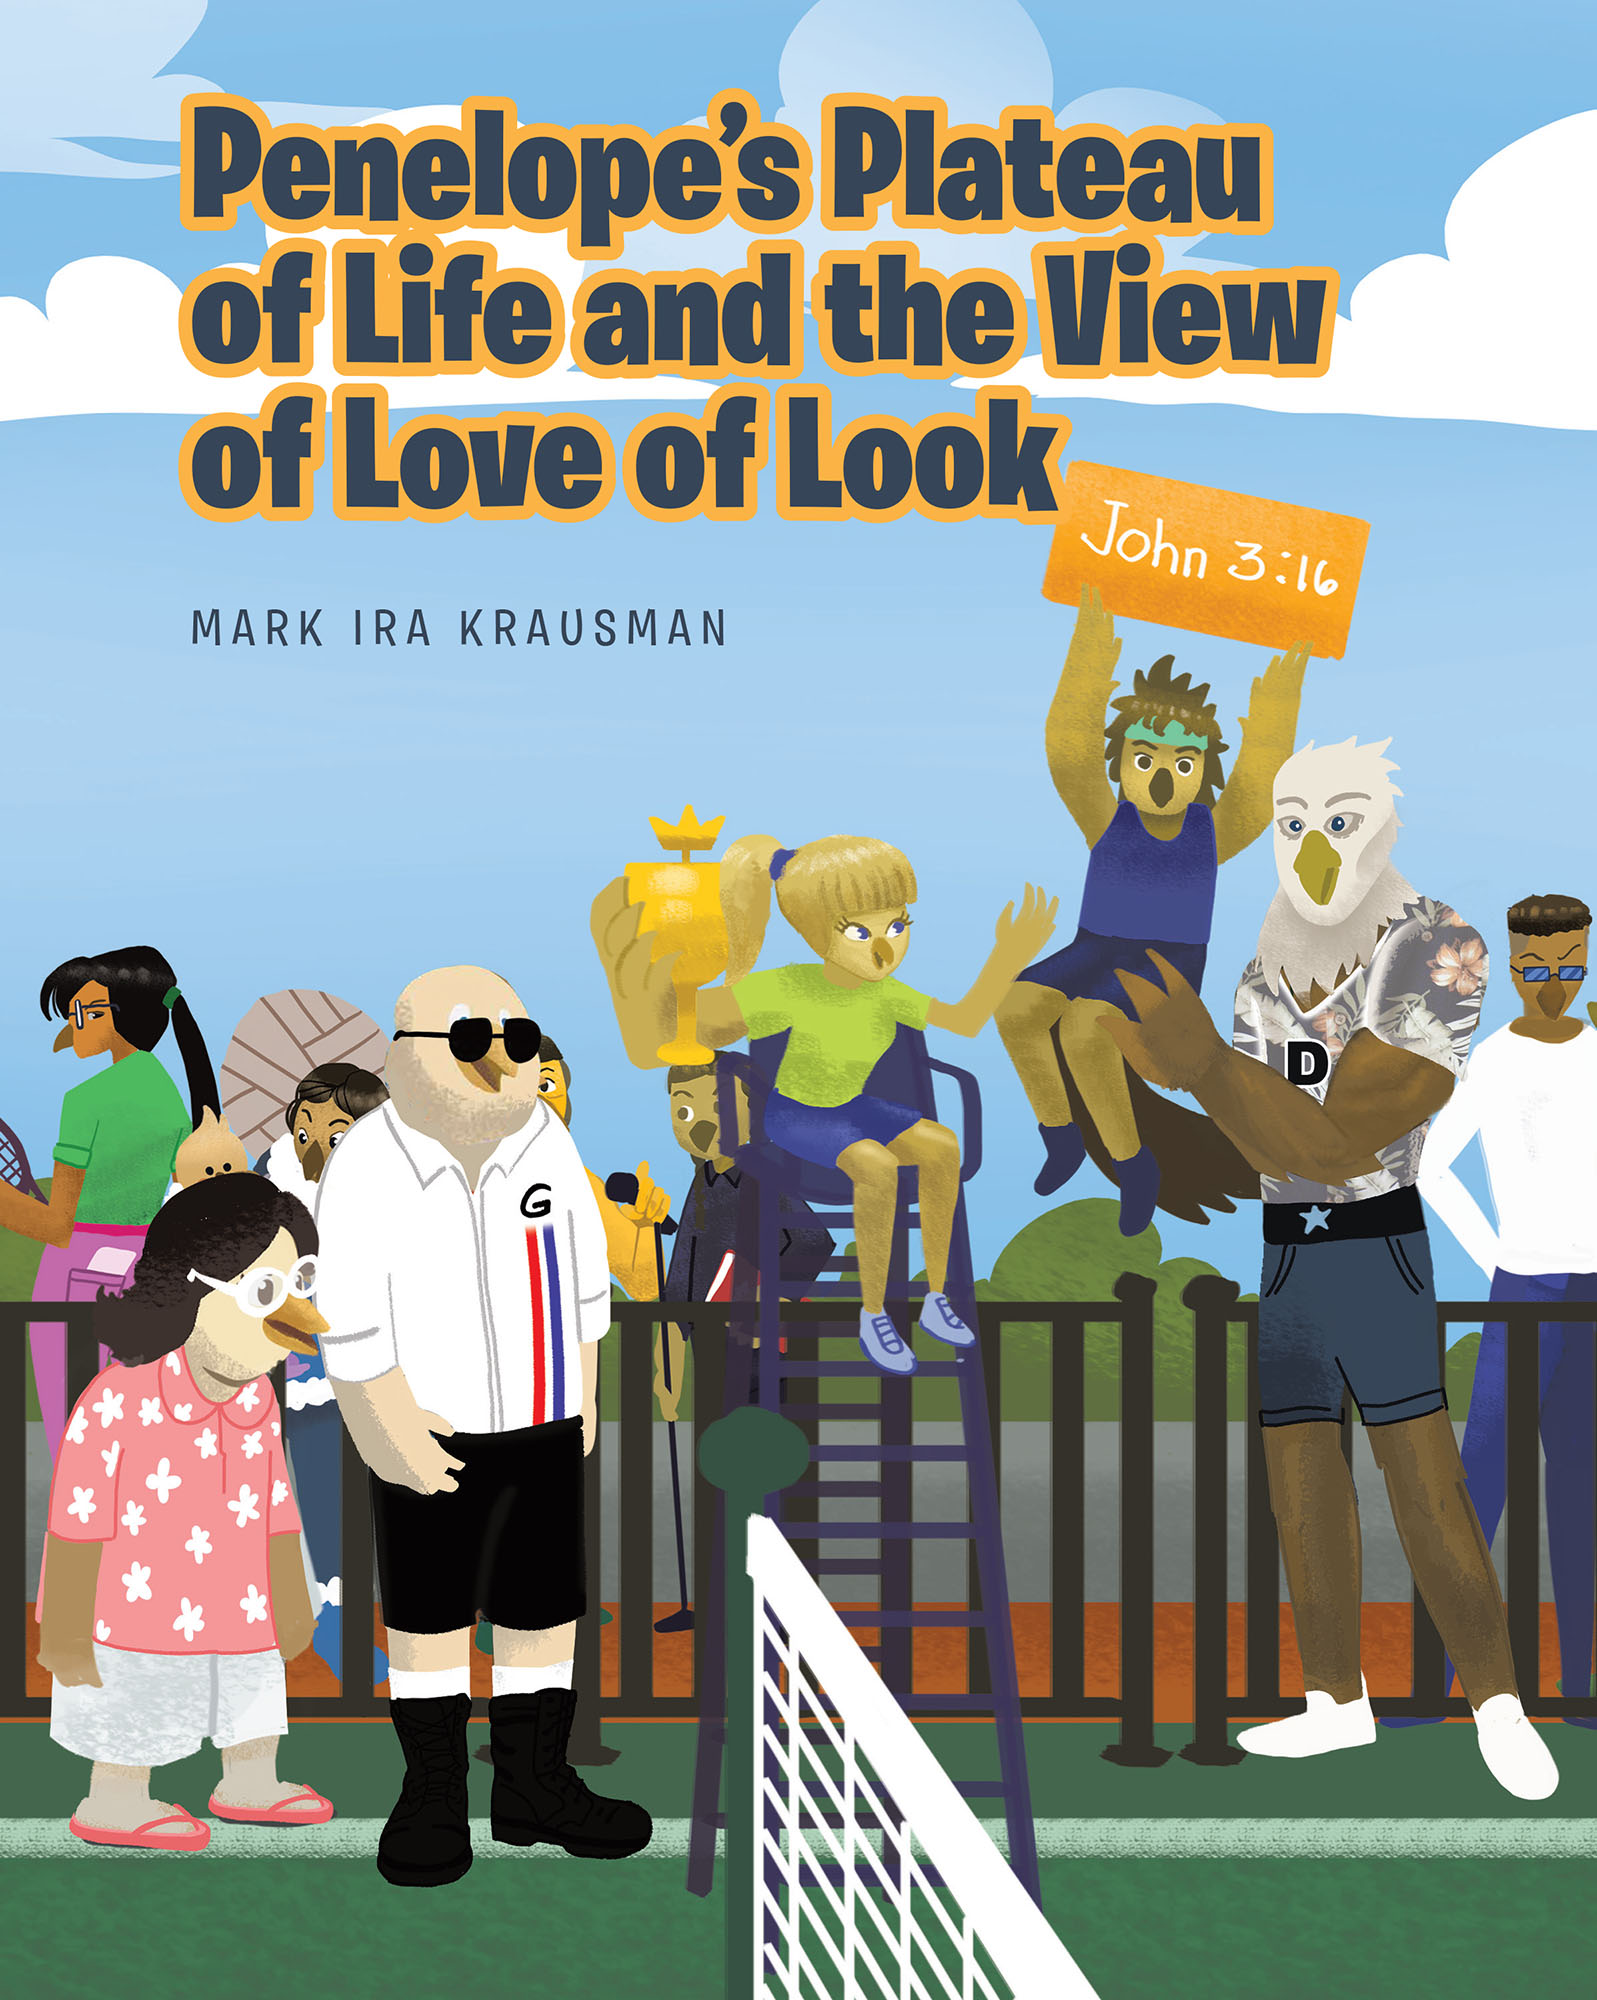 Author Mark Ira Krausman’s New Book, "Penelope's Plateau of Life and the View of Love of Look," Reveals How the Lord Always Has a Plan for His Followers in Life